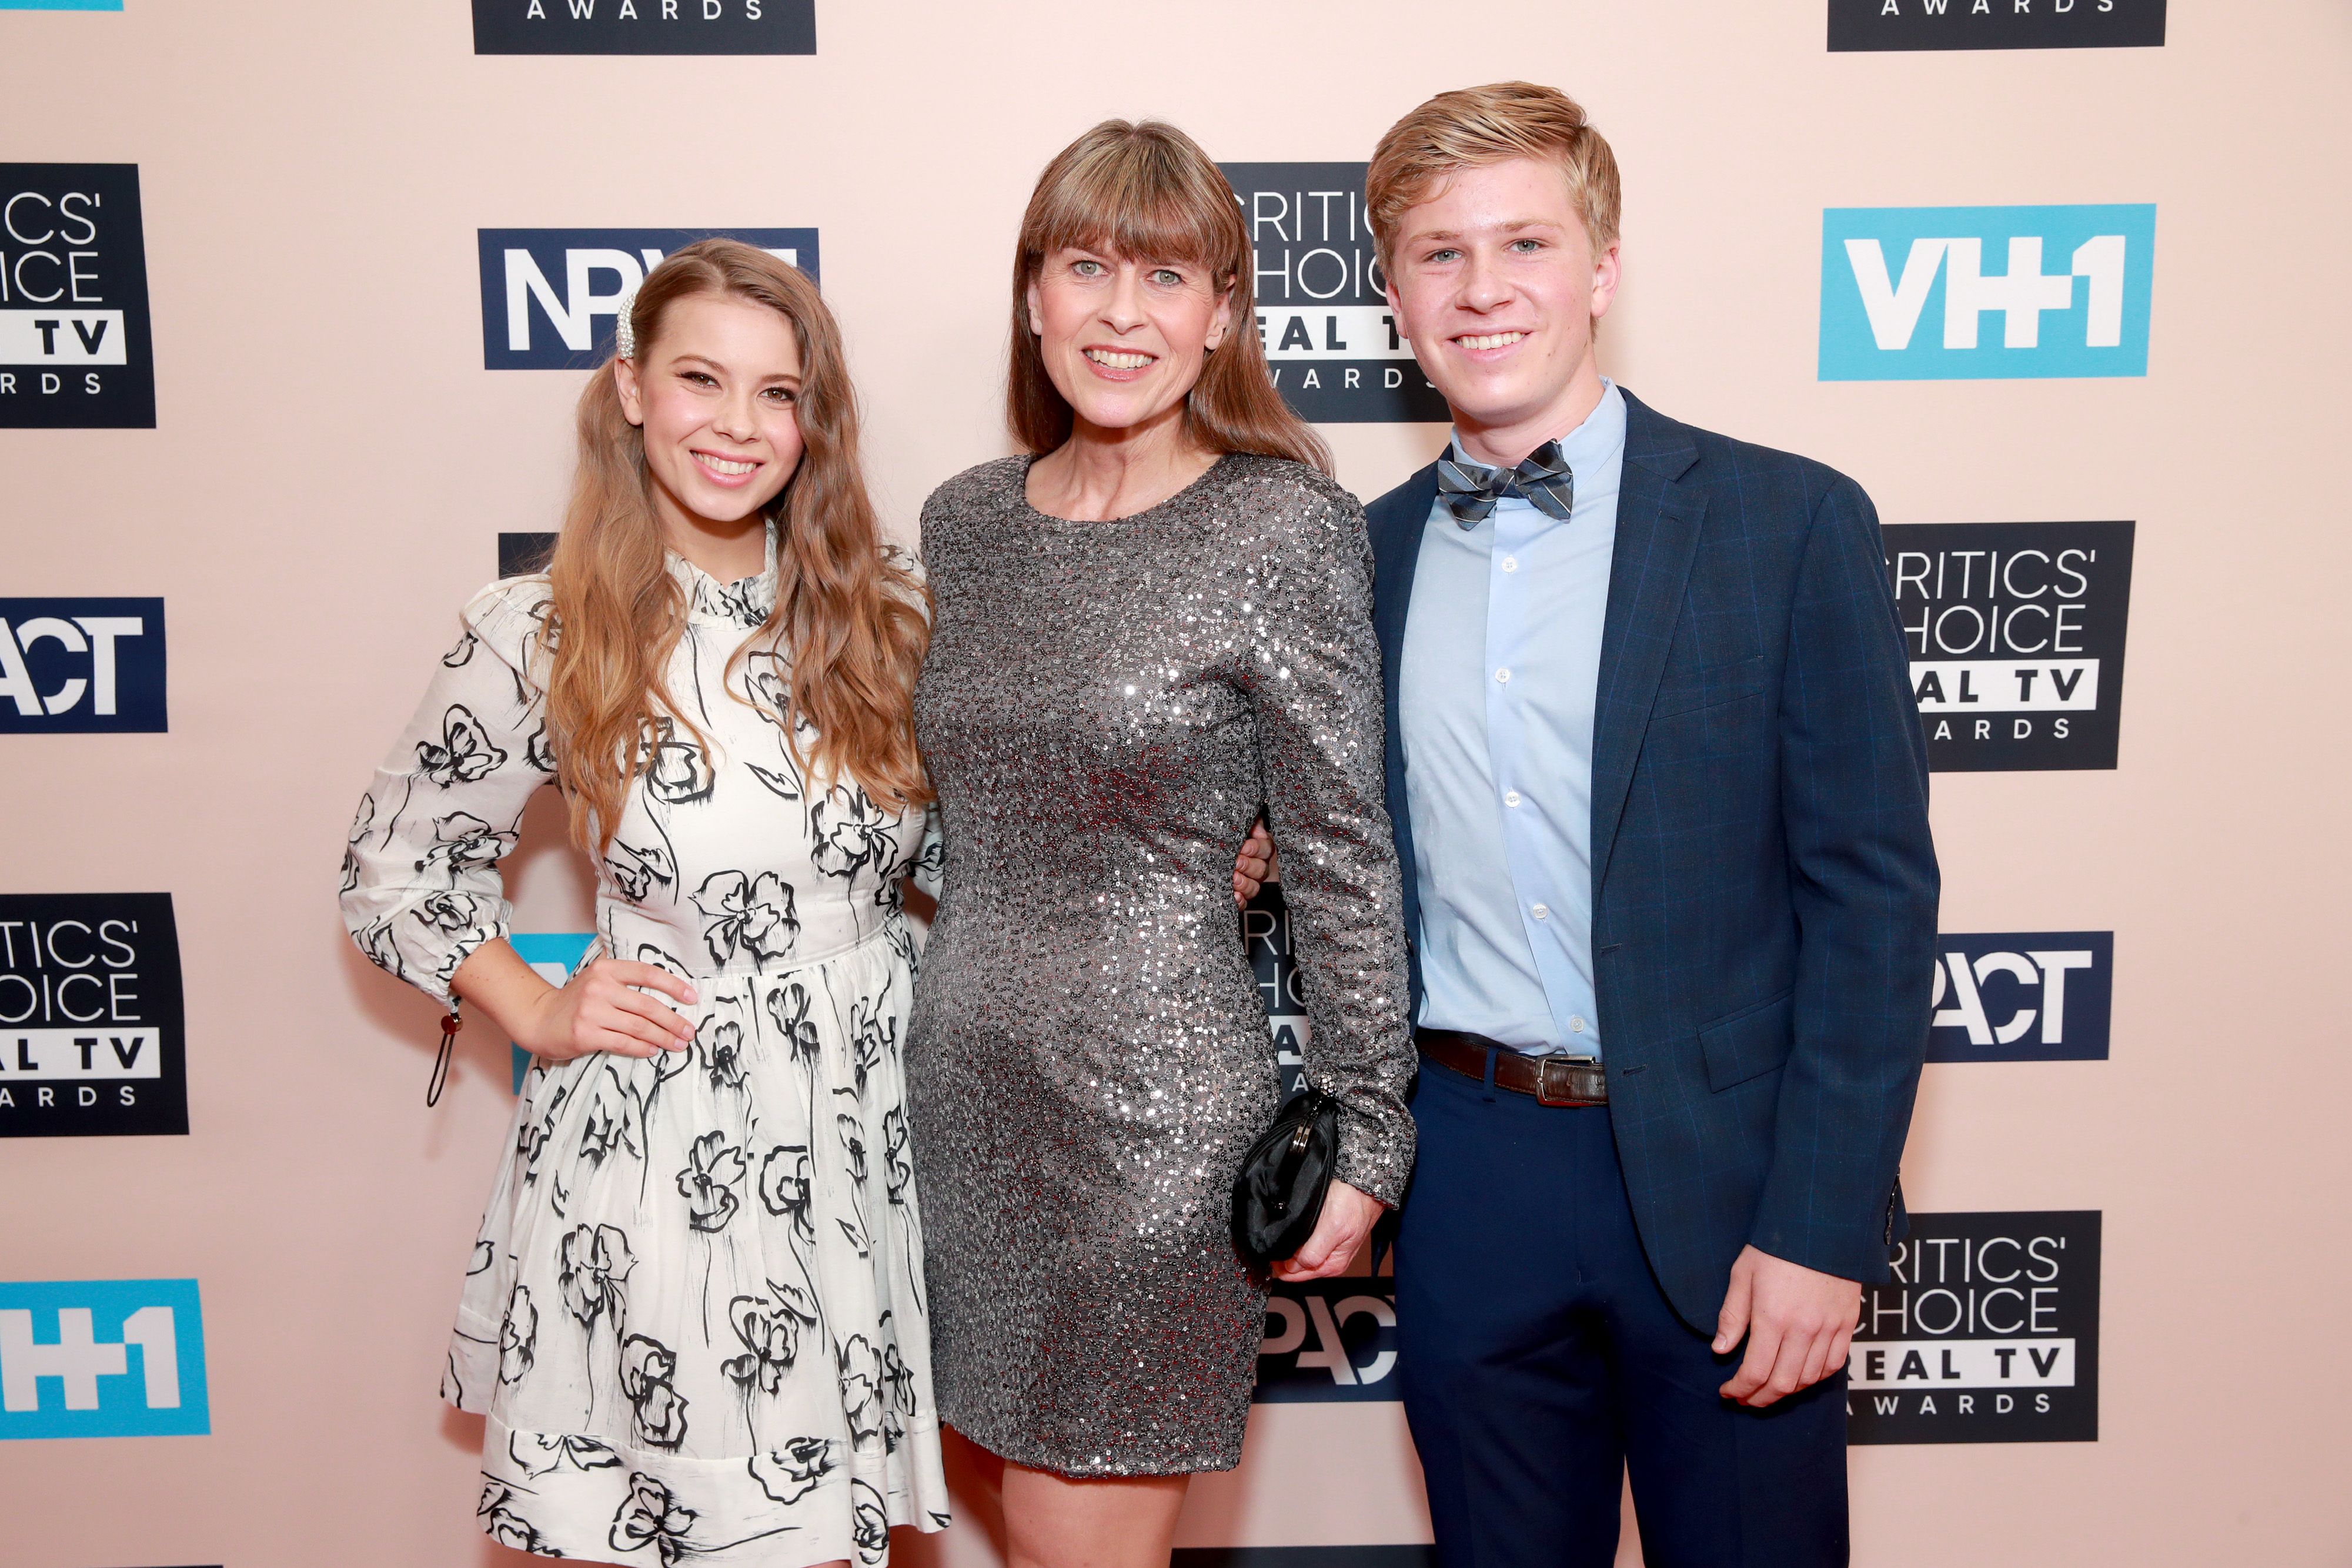 Bindi, Terri, and Robert Irwin at the Critics' Choice Real TV Awards at The Beverly Hilton Hotel on June 02, 2019, in Beverly Hills, California | Photo: Rich Fury/Getty Images